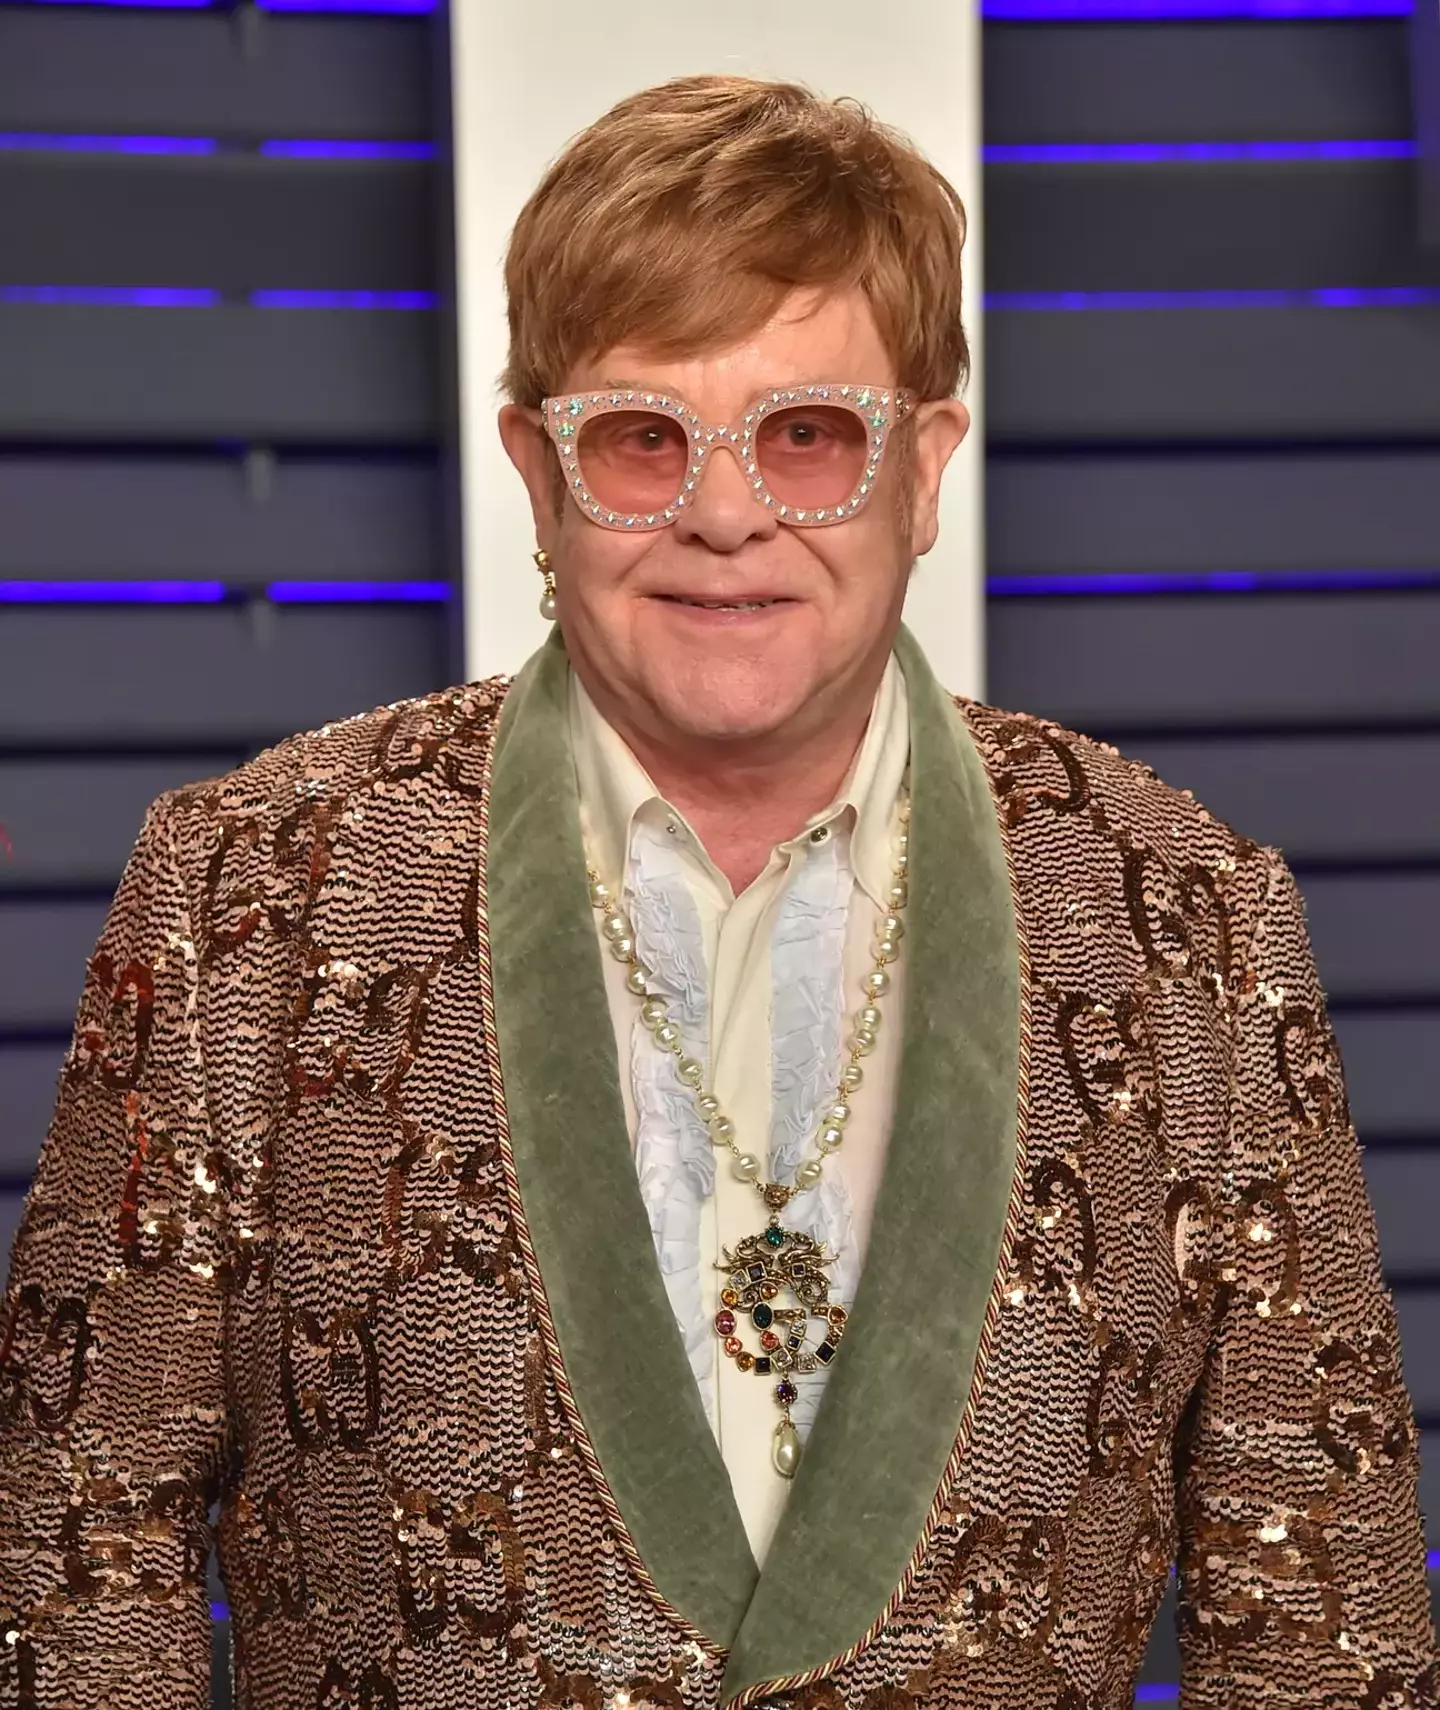 Elton John once claimed that Michael Jackson was a 'disturbing' person to be around.